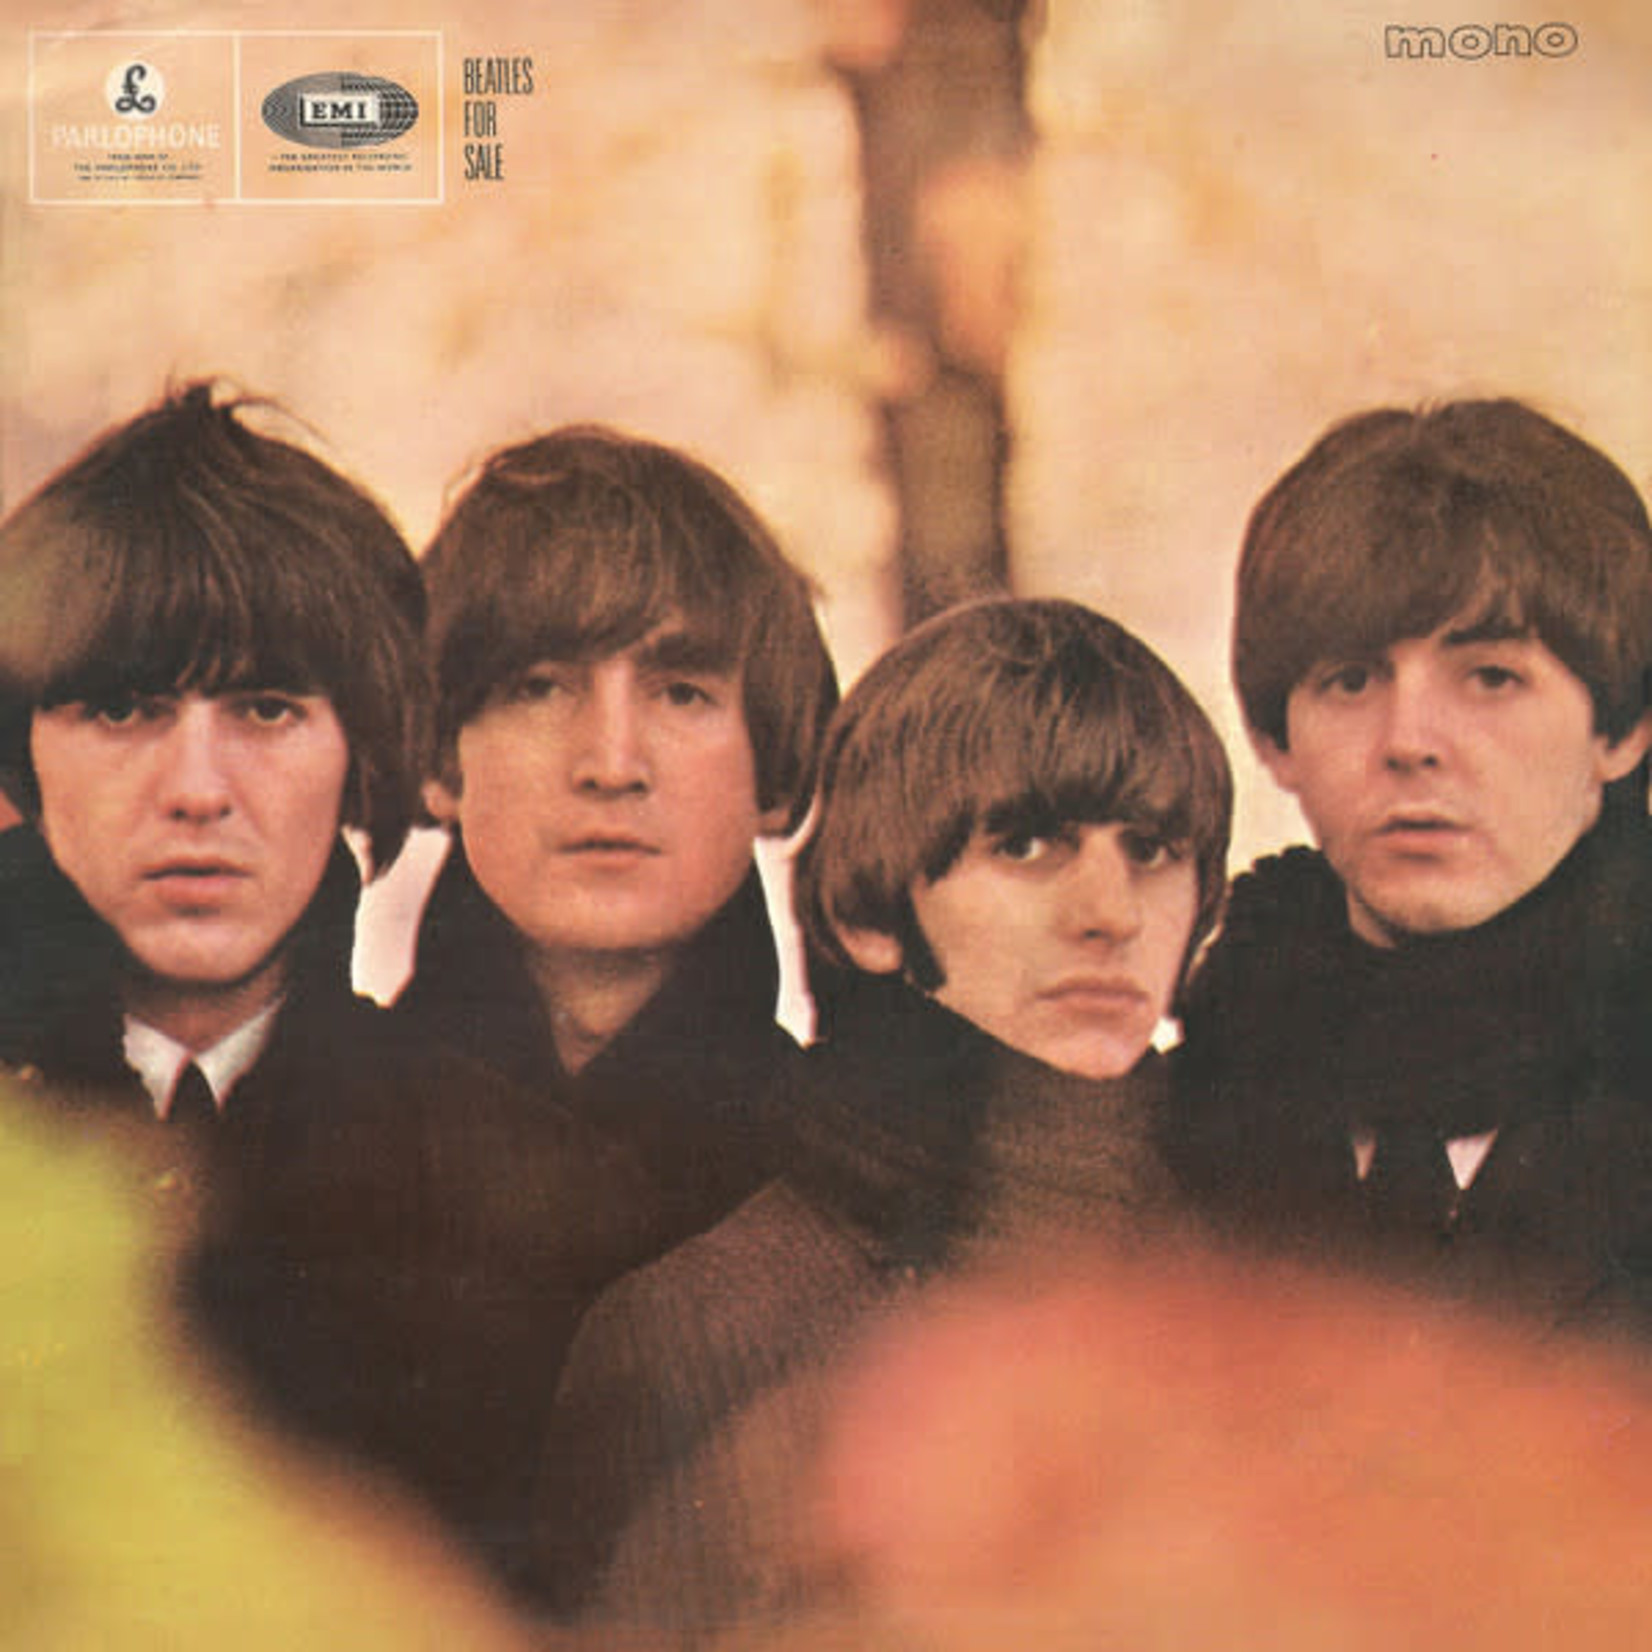 [Kollectibles] Beatles - Beatles for Sale (Mono, UK, yellow Parlophone, KT Tax Stamp, Company Inner, Disc VG)